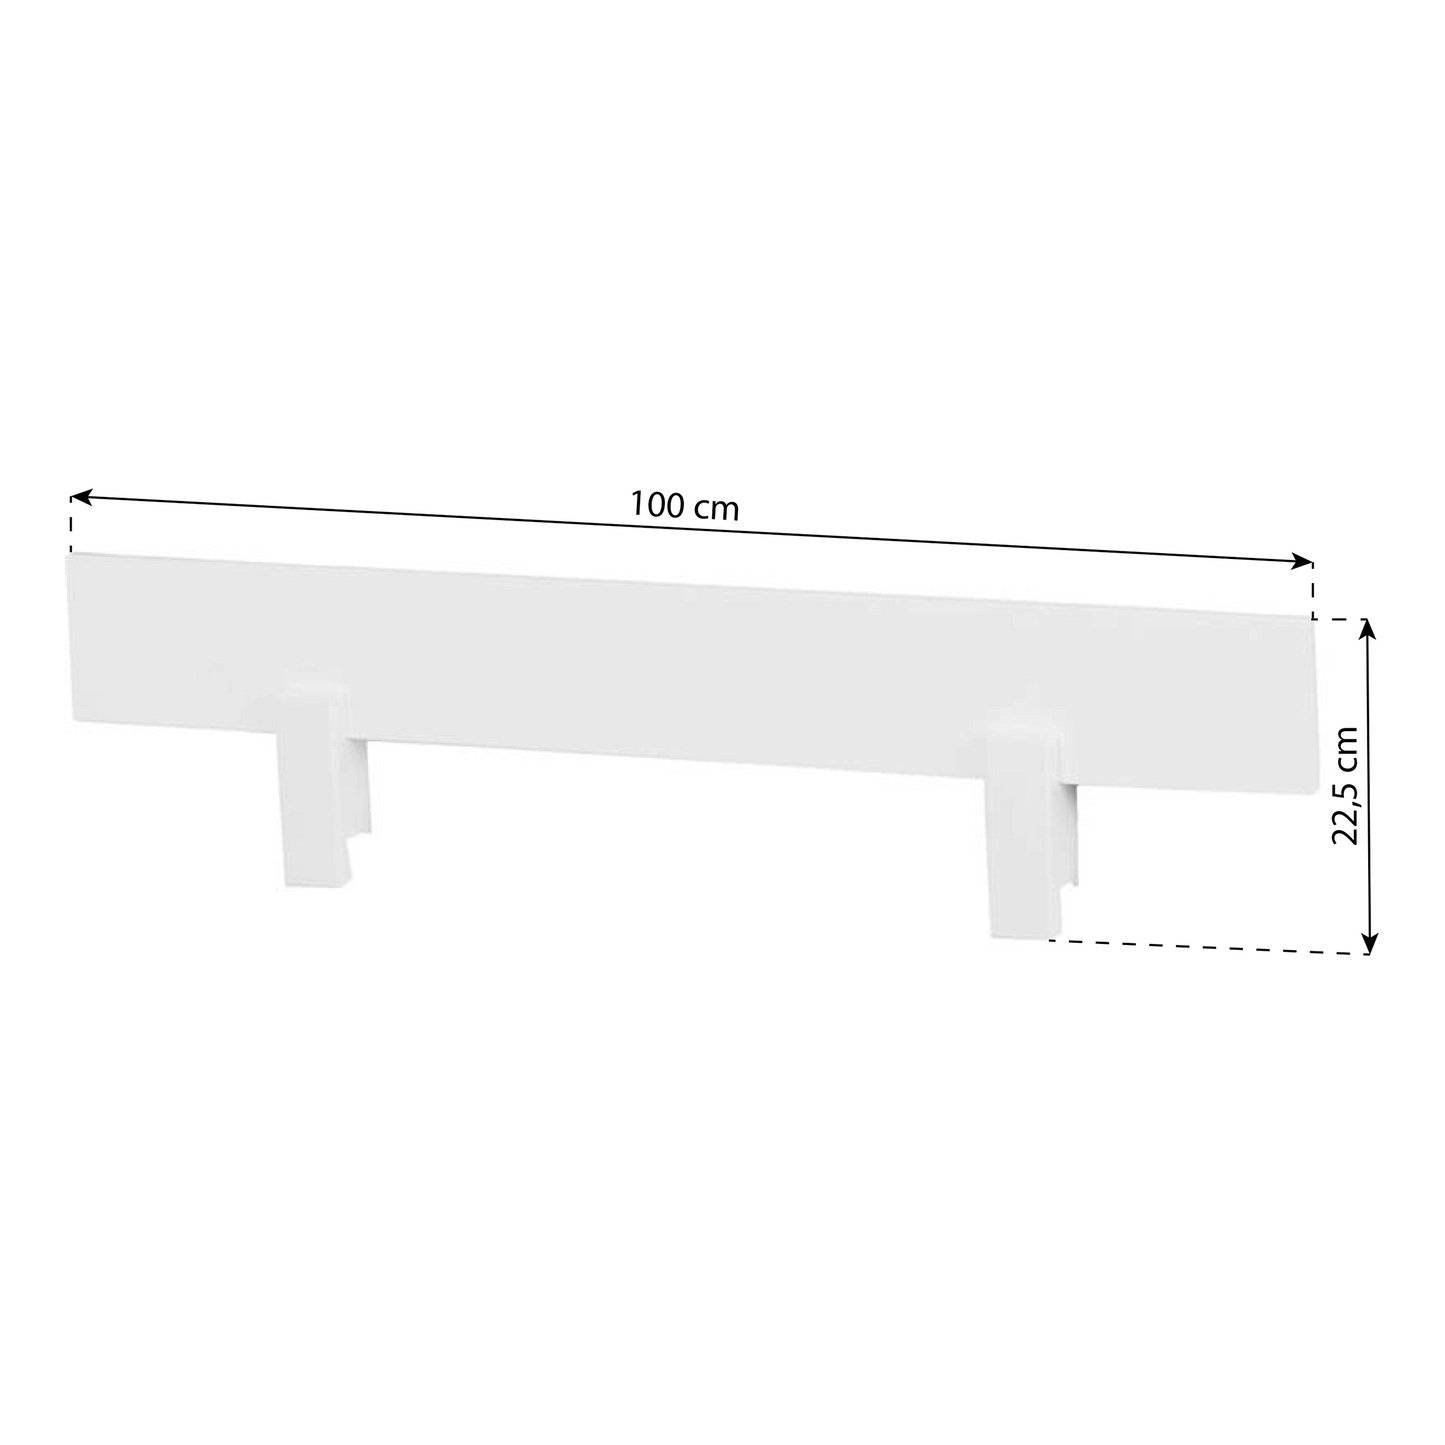 Noah Deluxe bed 90x200 cm with High and Medium Bed /  Κρεβάτι με συρόμενο